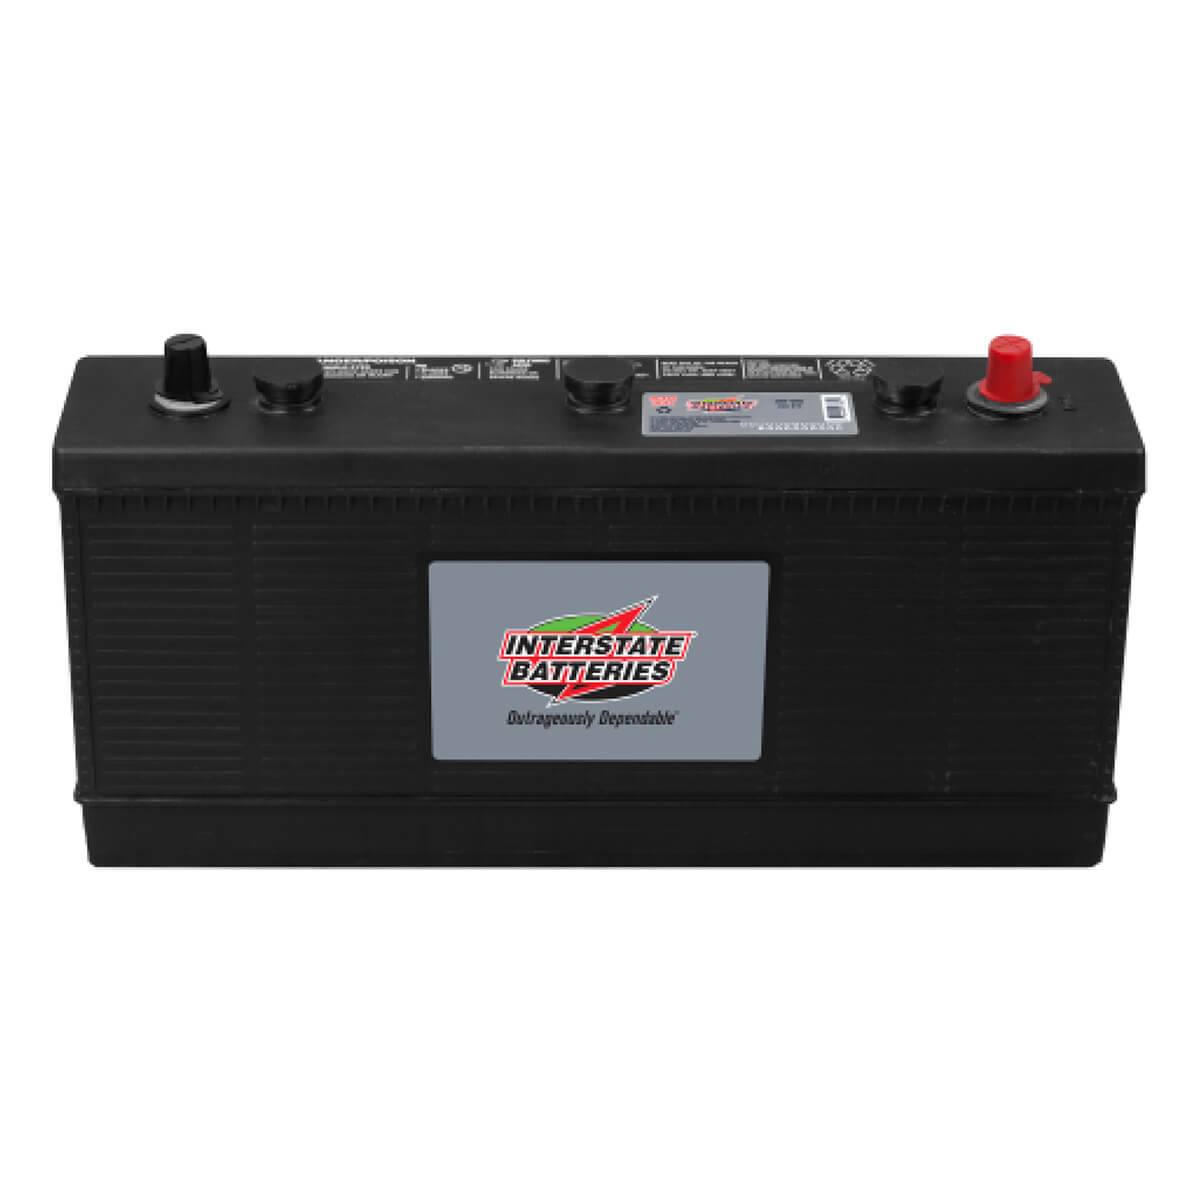 Interstate Commercial 6 Volt Battery - 3EH-VHD